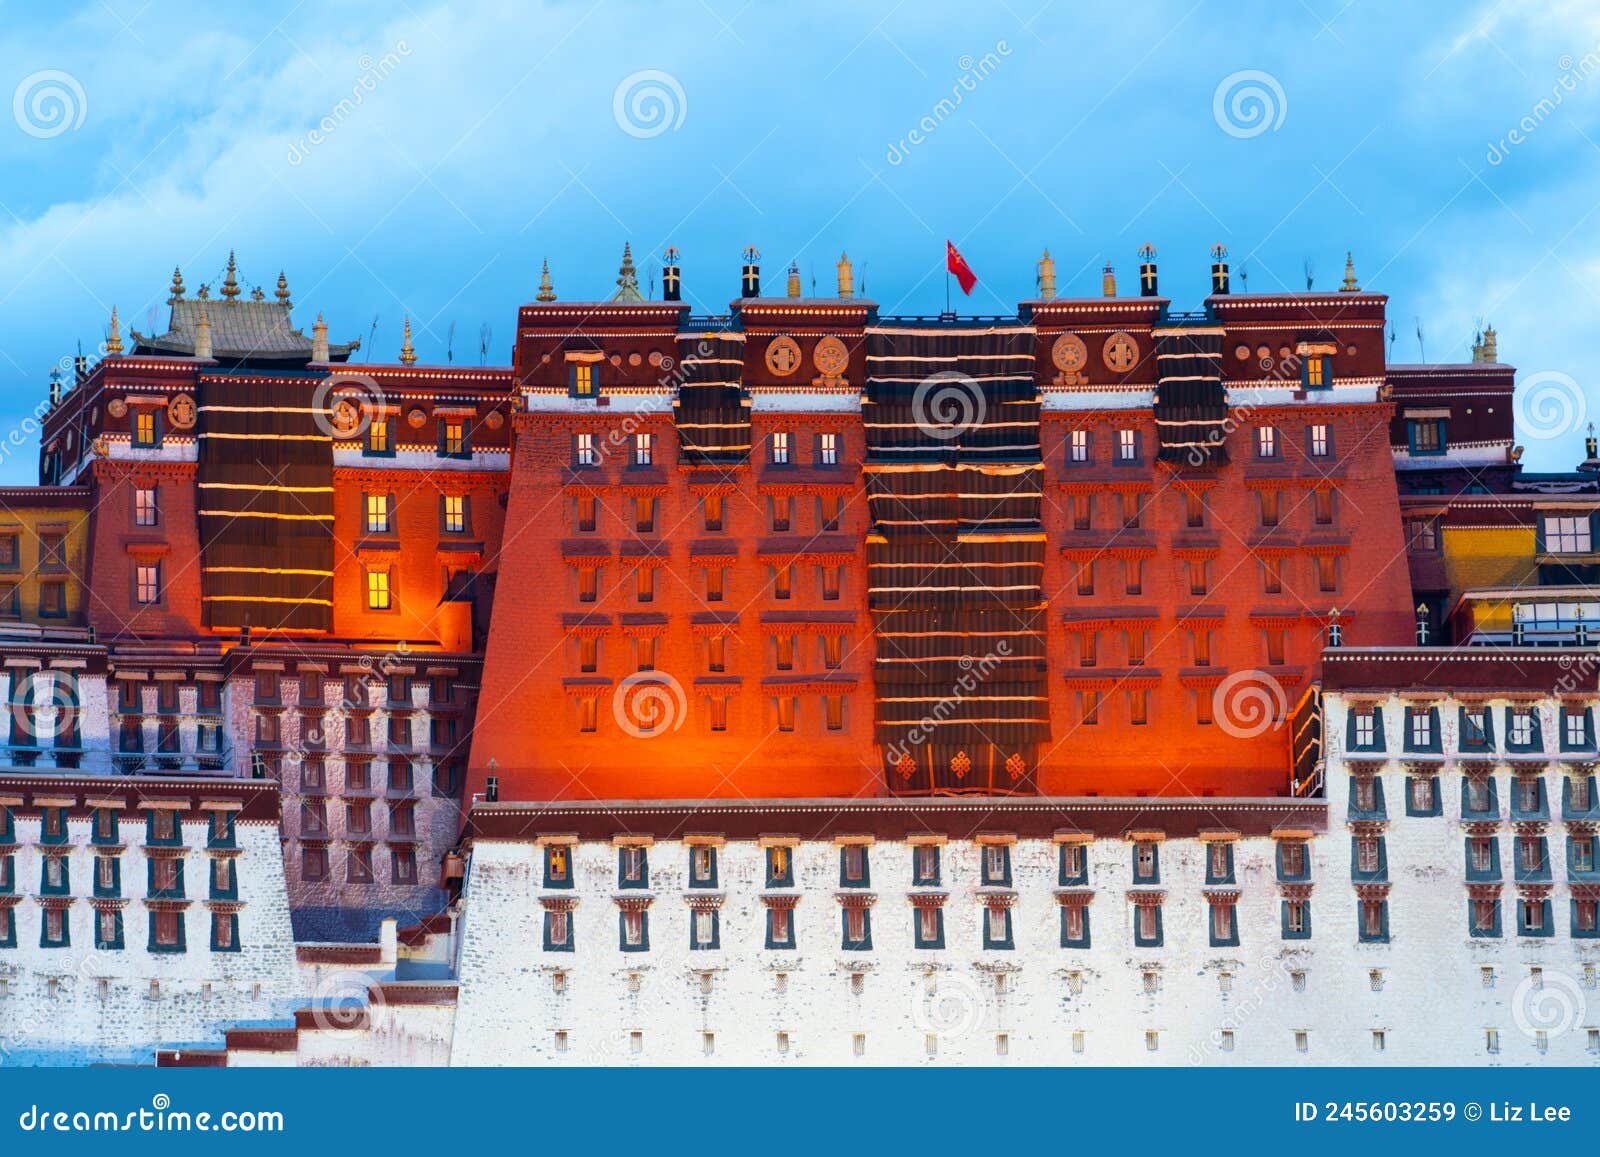 the potala palace, the holy place of tibetan buddhism at night